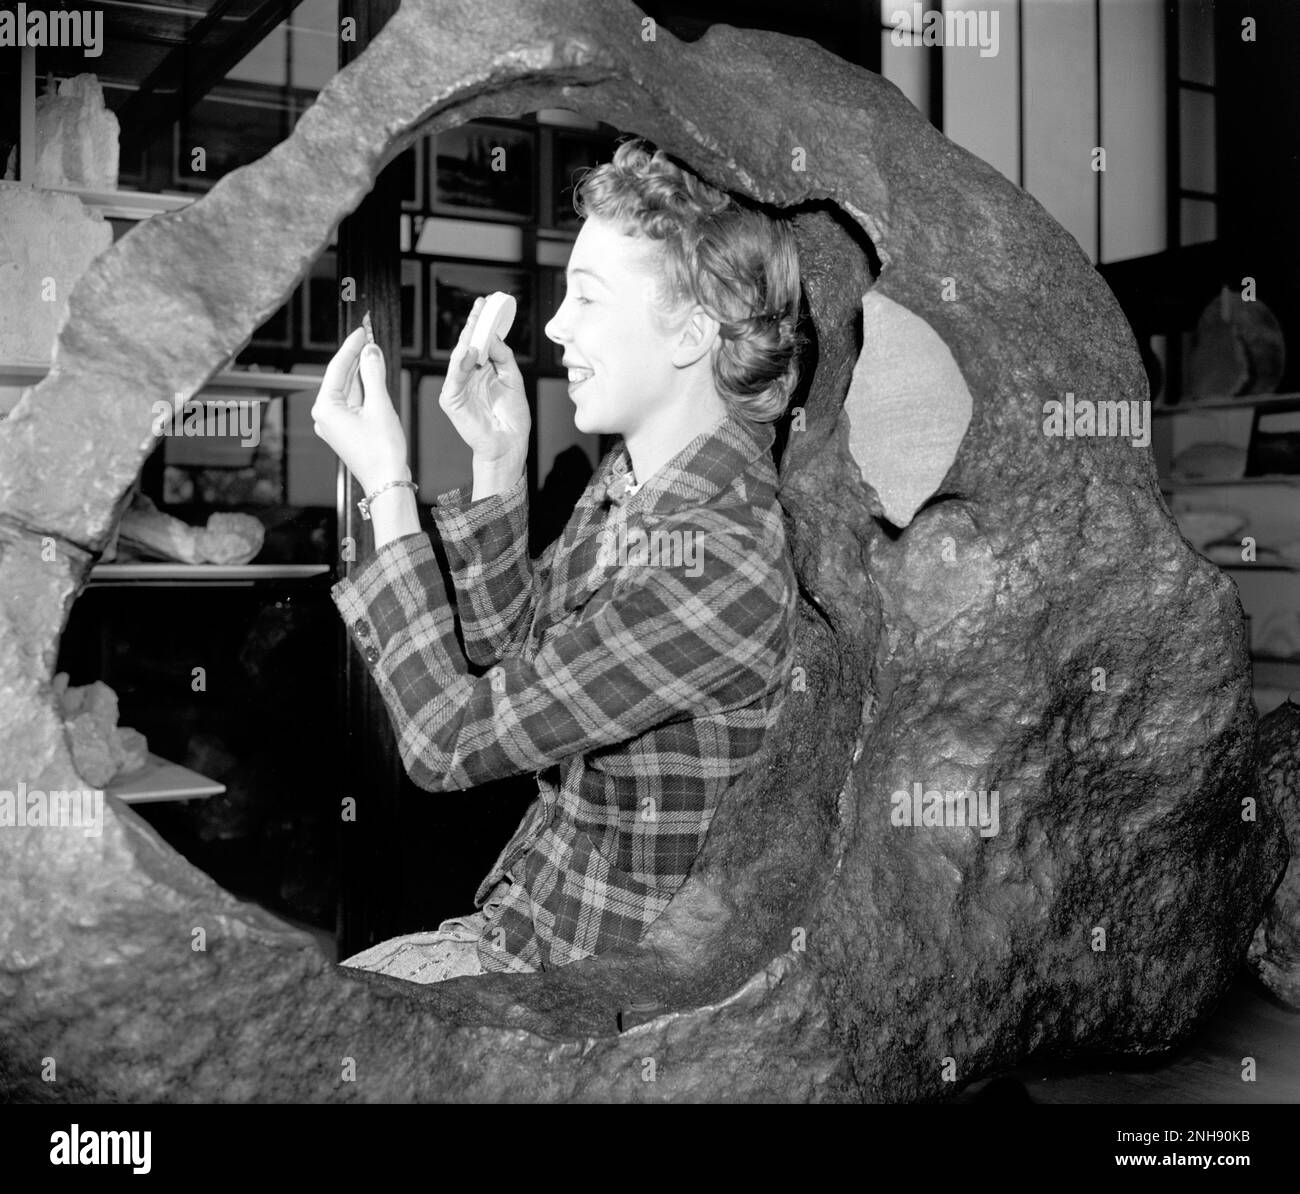 Woman posing with the Irwin-Ainsa (Tucson ring) meteorite at the Smithsonian Museum of Natural History, Washington, D.C. This Tucson meteorite is a brezinaite meteorite fragment. It was claimed by Jesuit missionaries at the foot of Sierra de la Madera in the 1700s and eventually transported to Tucson, Arizona, where it was used as a kind of public anvil. Brezinaite is a rare mineral composed of chromium and sulfur, found in meteorites. Harris & Ewing, photographer, c. 1938-39. Stock Photo